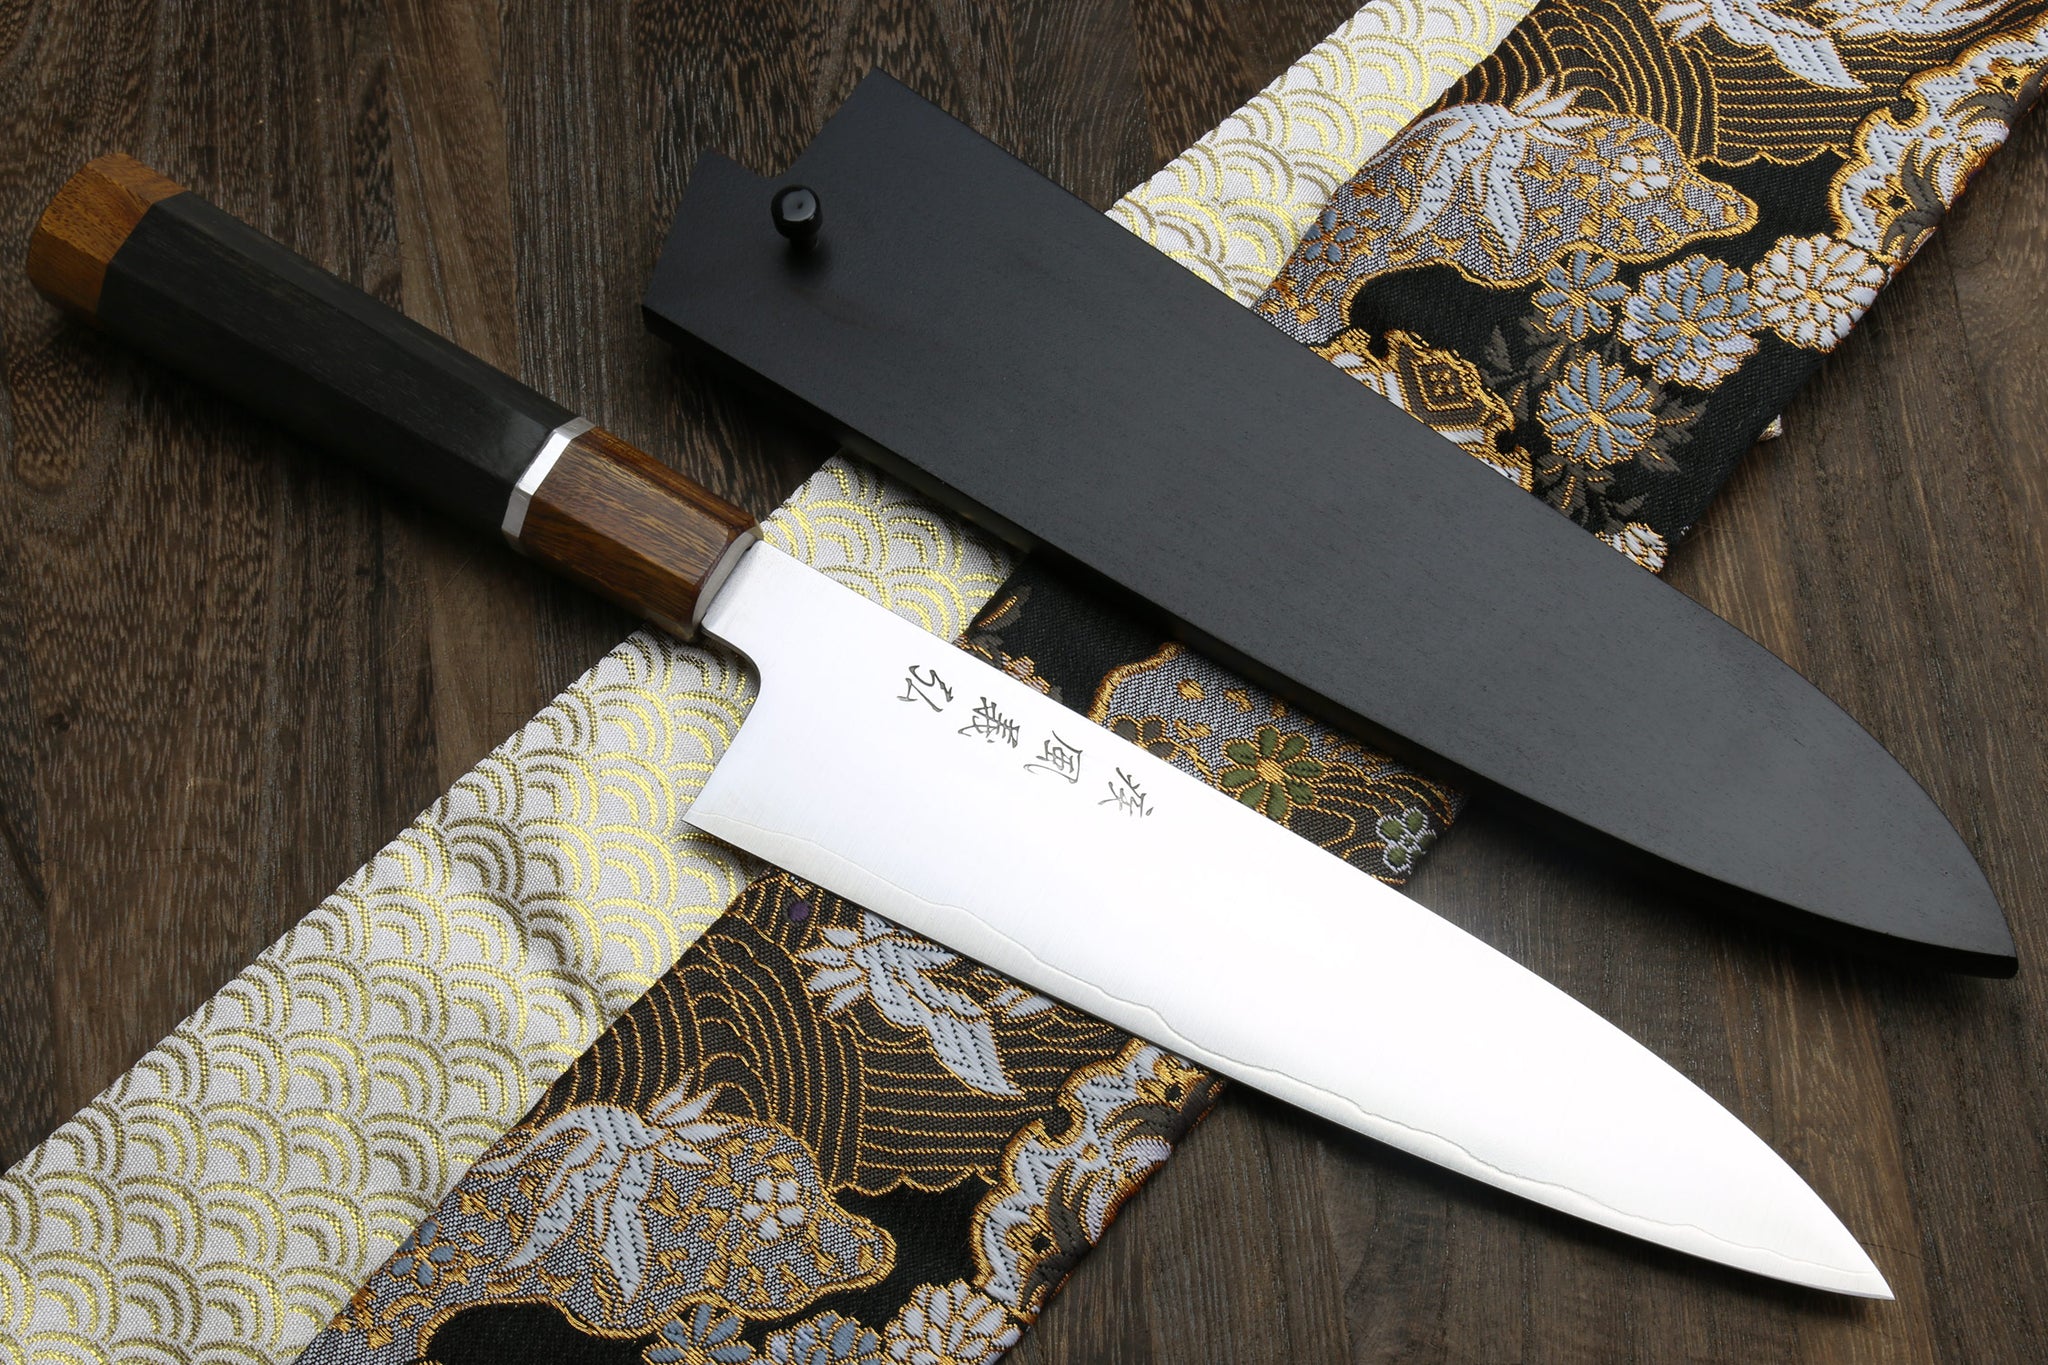 TAIE Kitchen Carving Knife 9.5 Inch Japanese Sujihiki Knife High Carbon  Powder Forge Stainless Steel 905 Blade With 62 HRC Ash Wood Handle Light